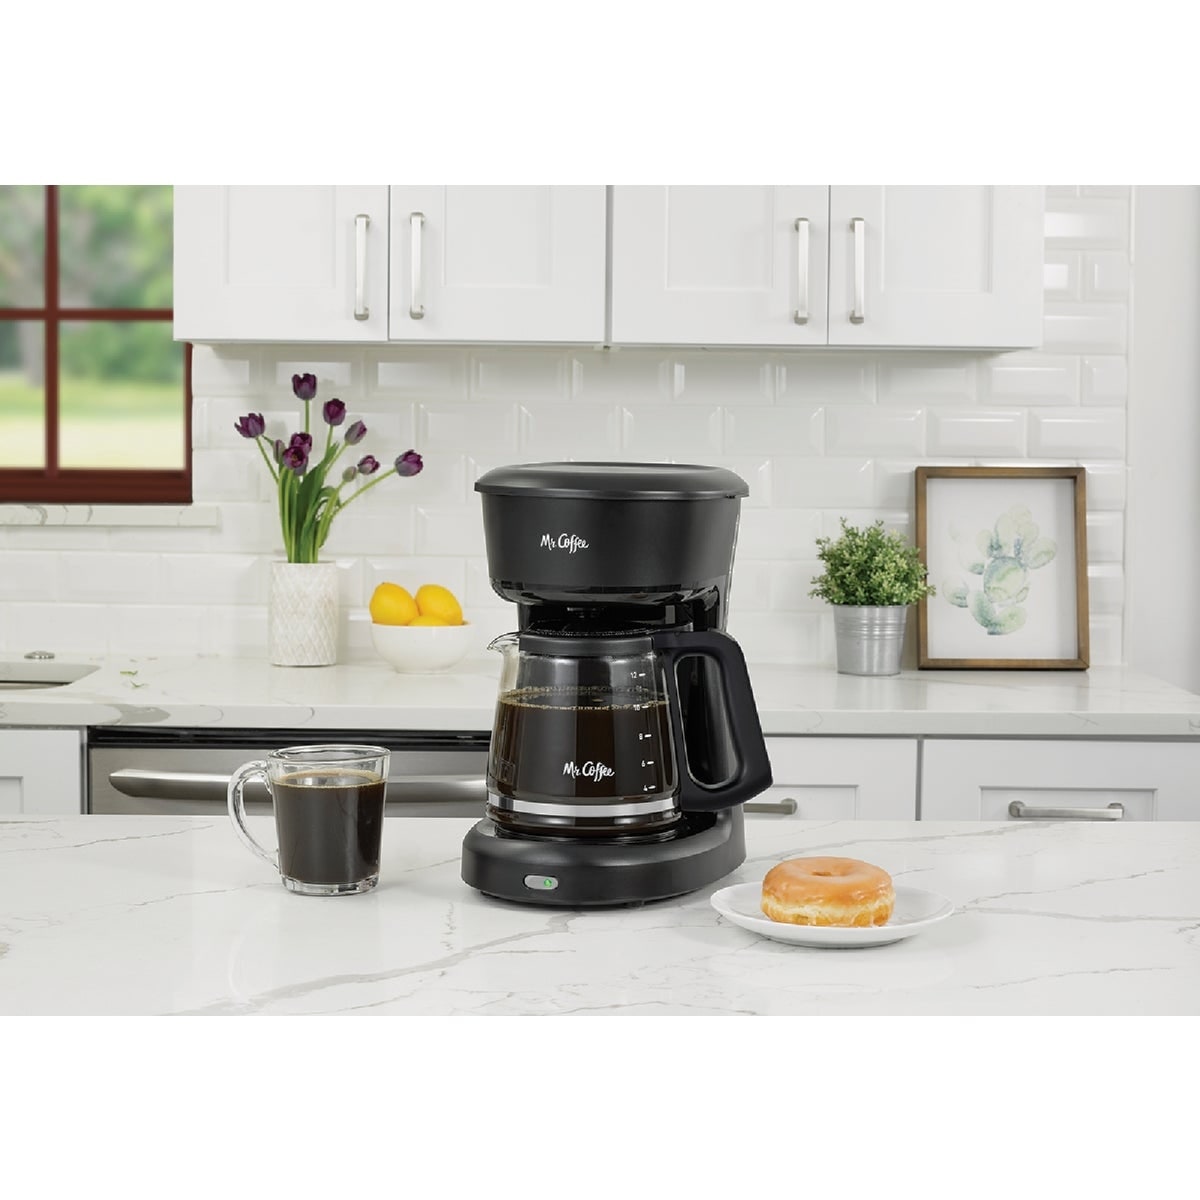 https://ak1.ostkcdn.com/images/products/is/images/direct/6fa1b248ef2897975505c4406edfd9d3dcc117b7/Mr-Coffee-12-Cup-Switch-Black-Coffee-Maker---1-Each.jpg